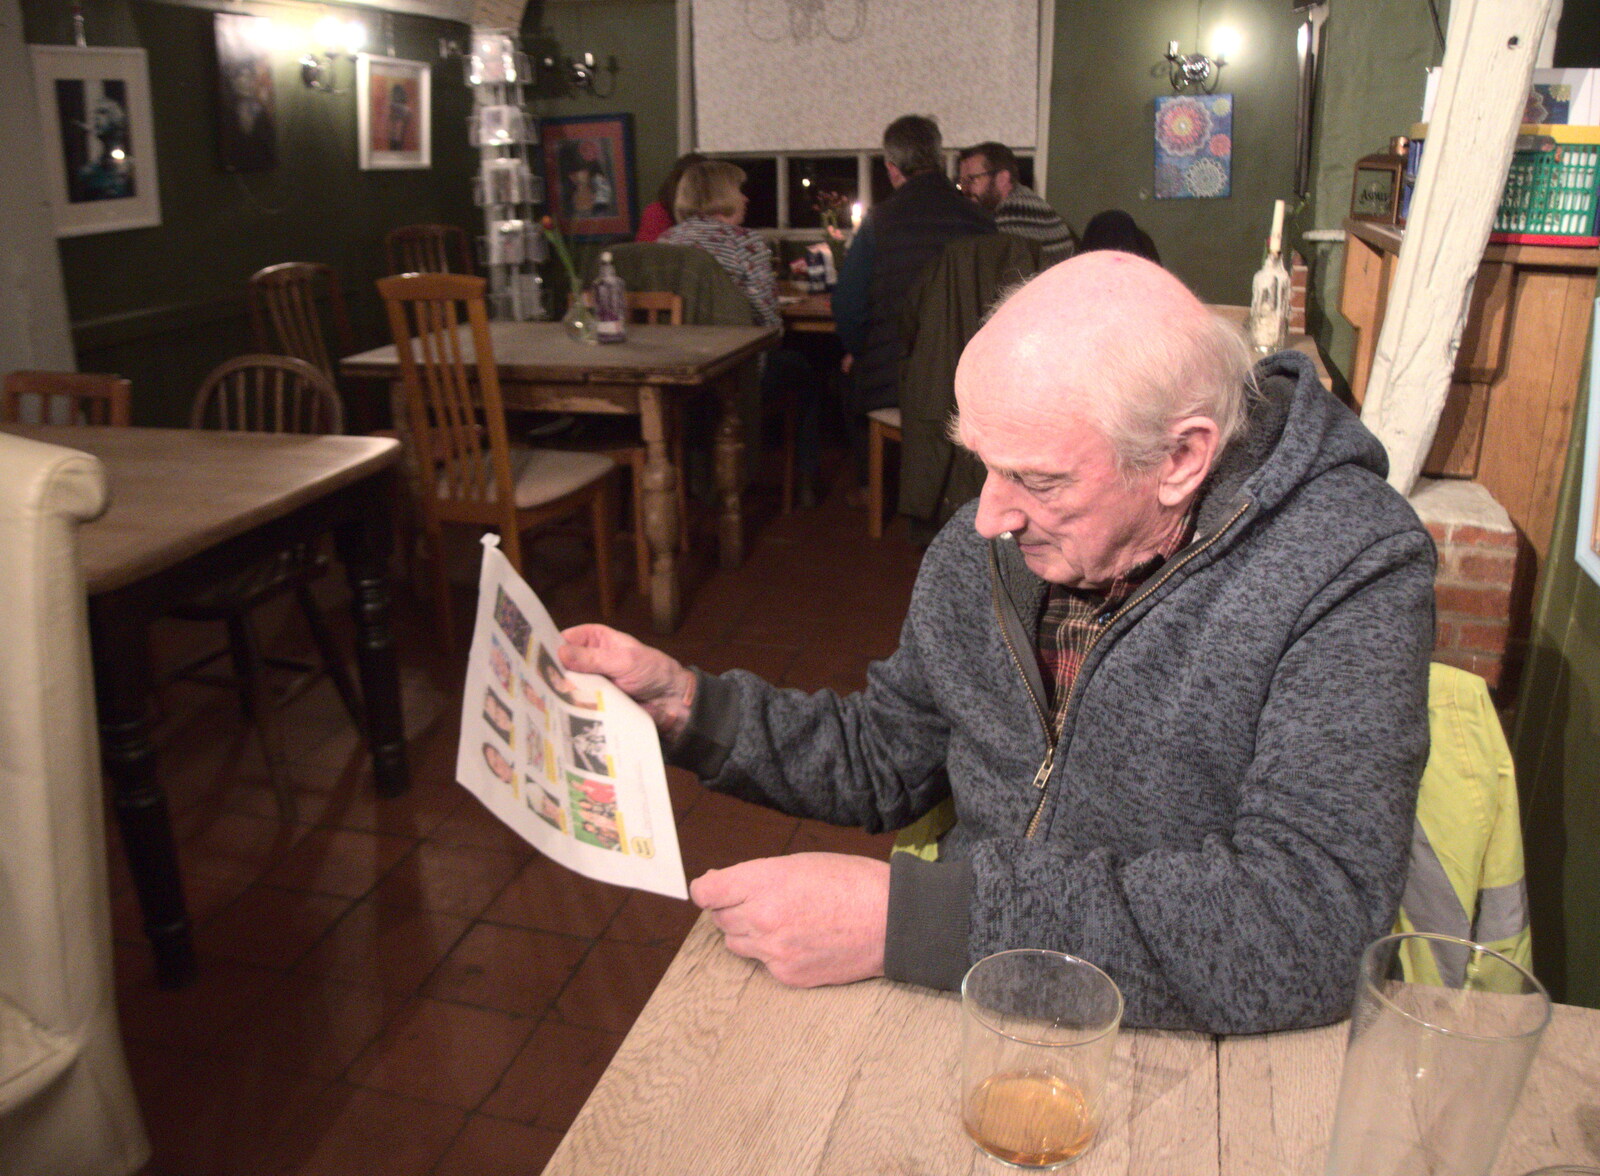 Mick the Brick checks out a quiz sheet from Guys, Dolls, and a Snow Day, Brome, Suffolk - 11th March 2023